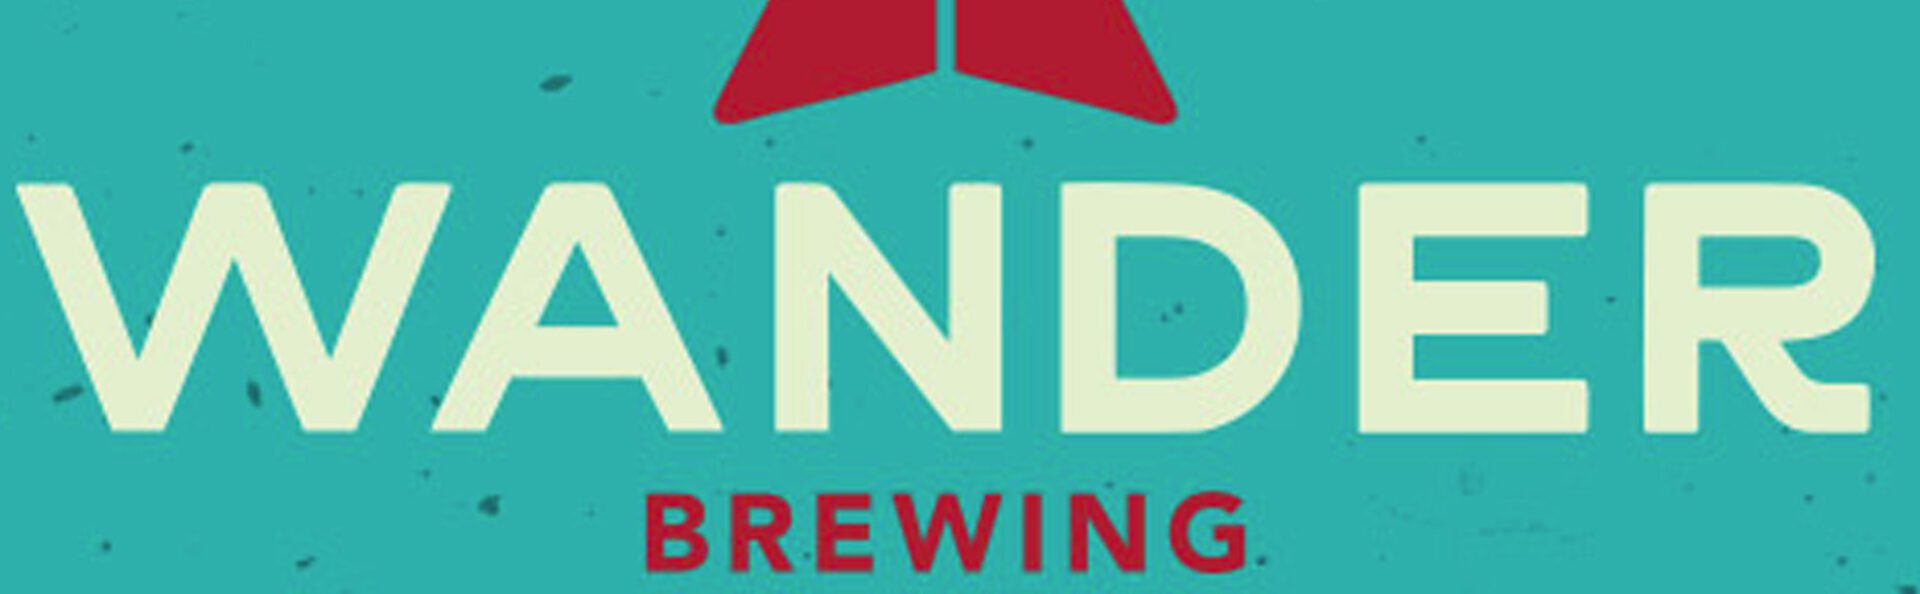 A blue sign with red letters that say " candi brewing company ".